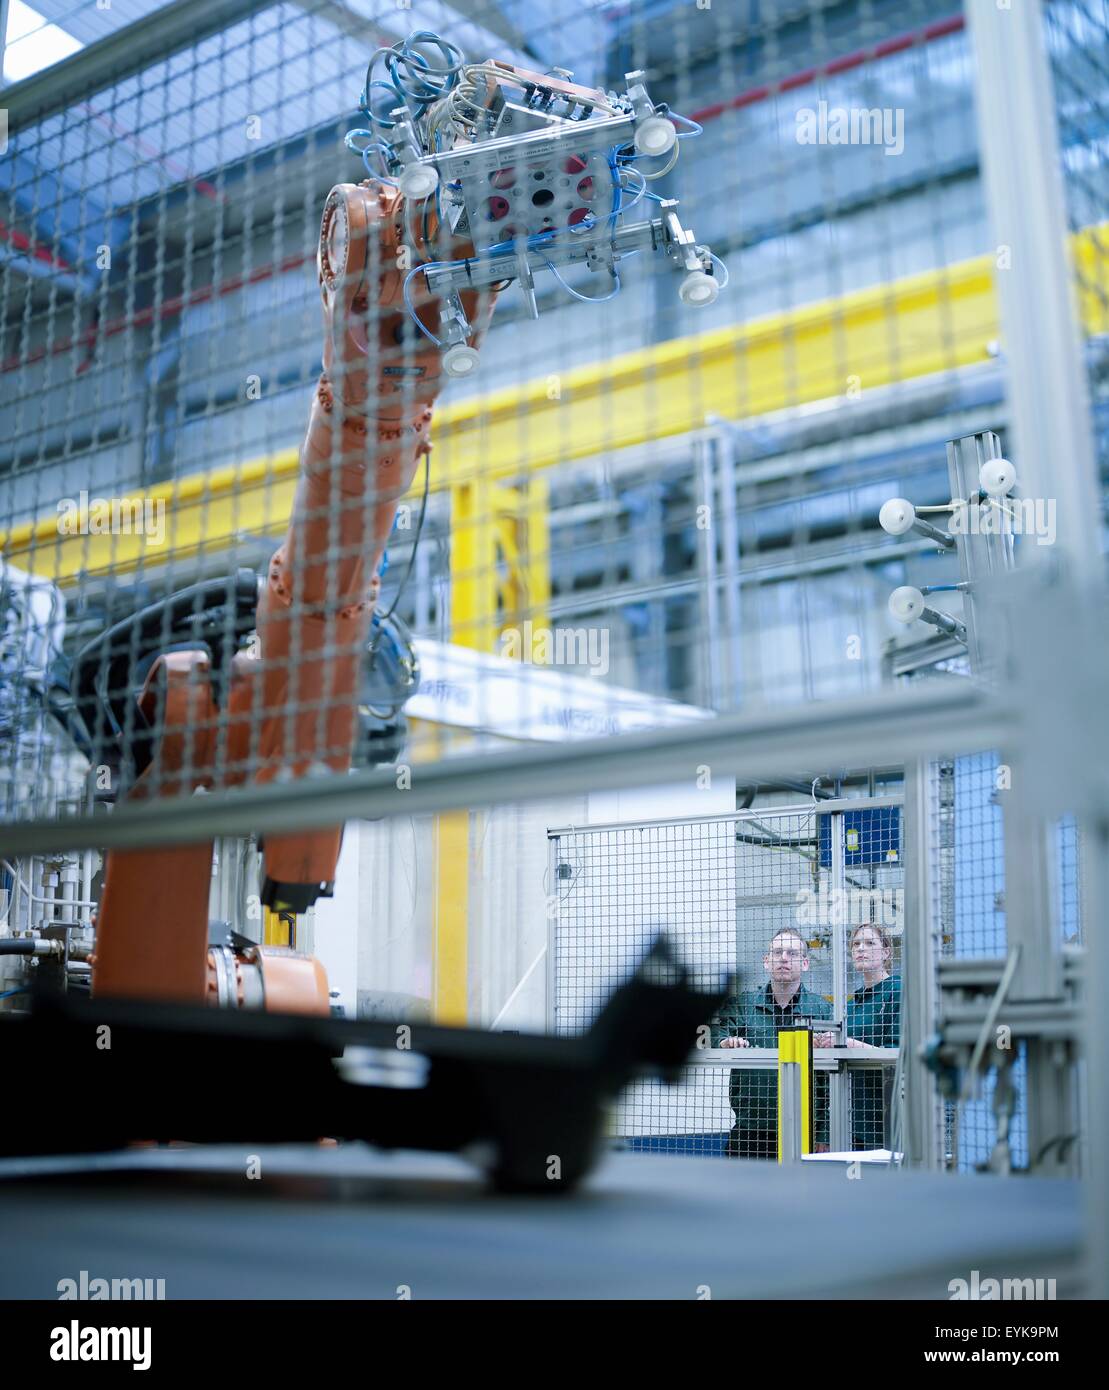 Workers watching robot perform tasks in factory Stock Photo